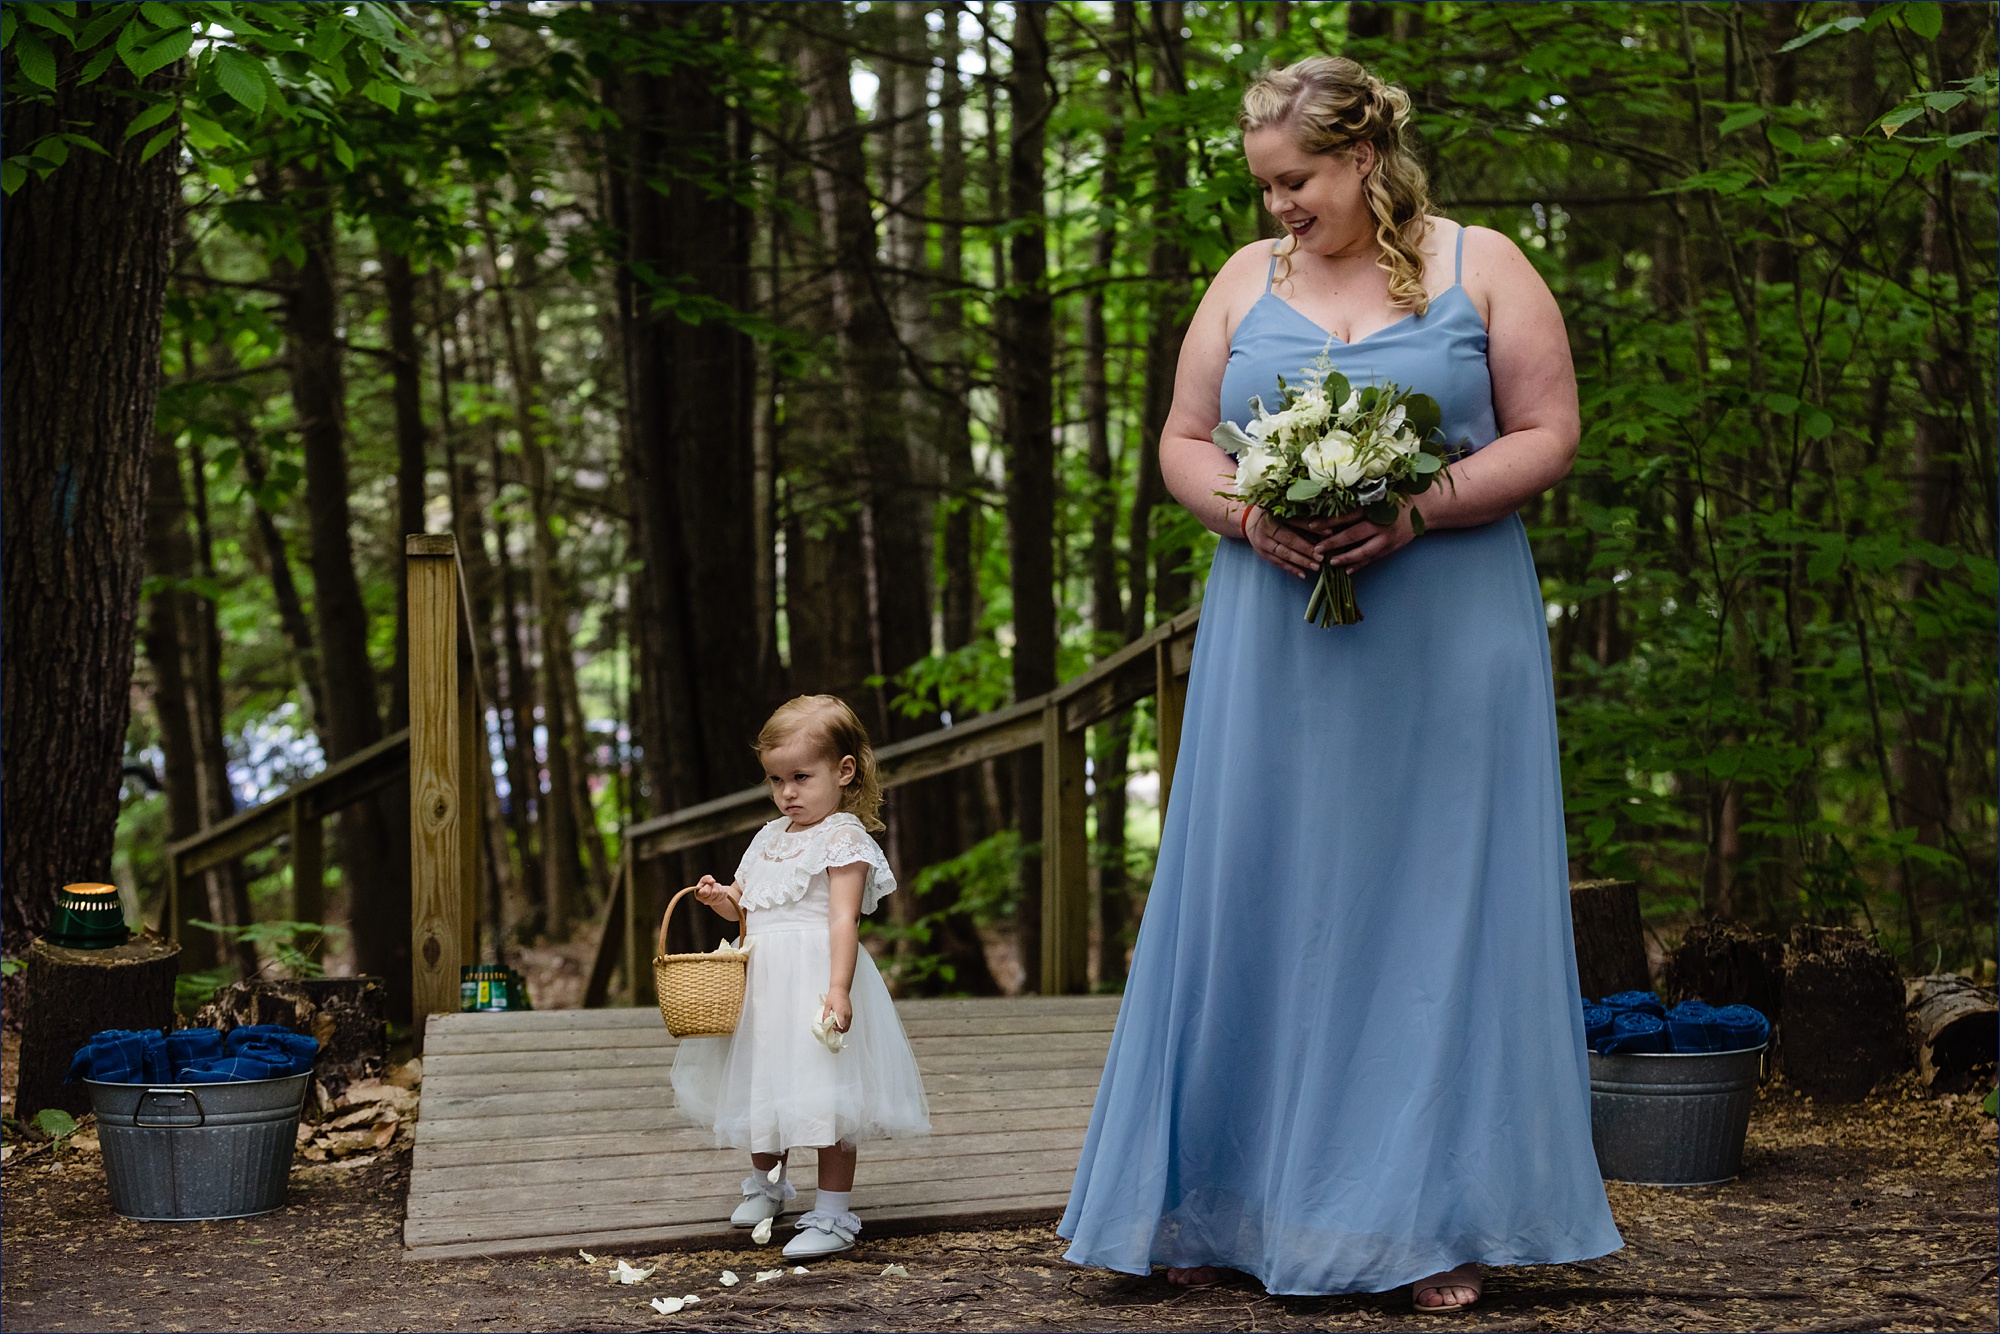 The flower girl enters the wedding ceremony full of sweet attitude at Hardy Farm